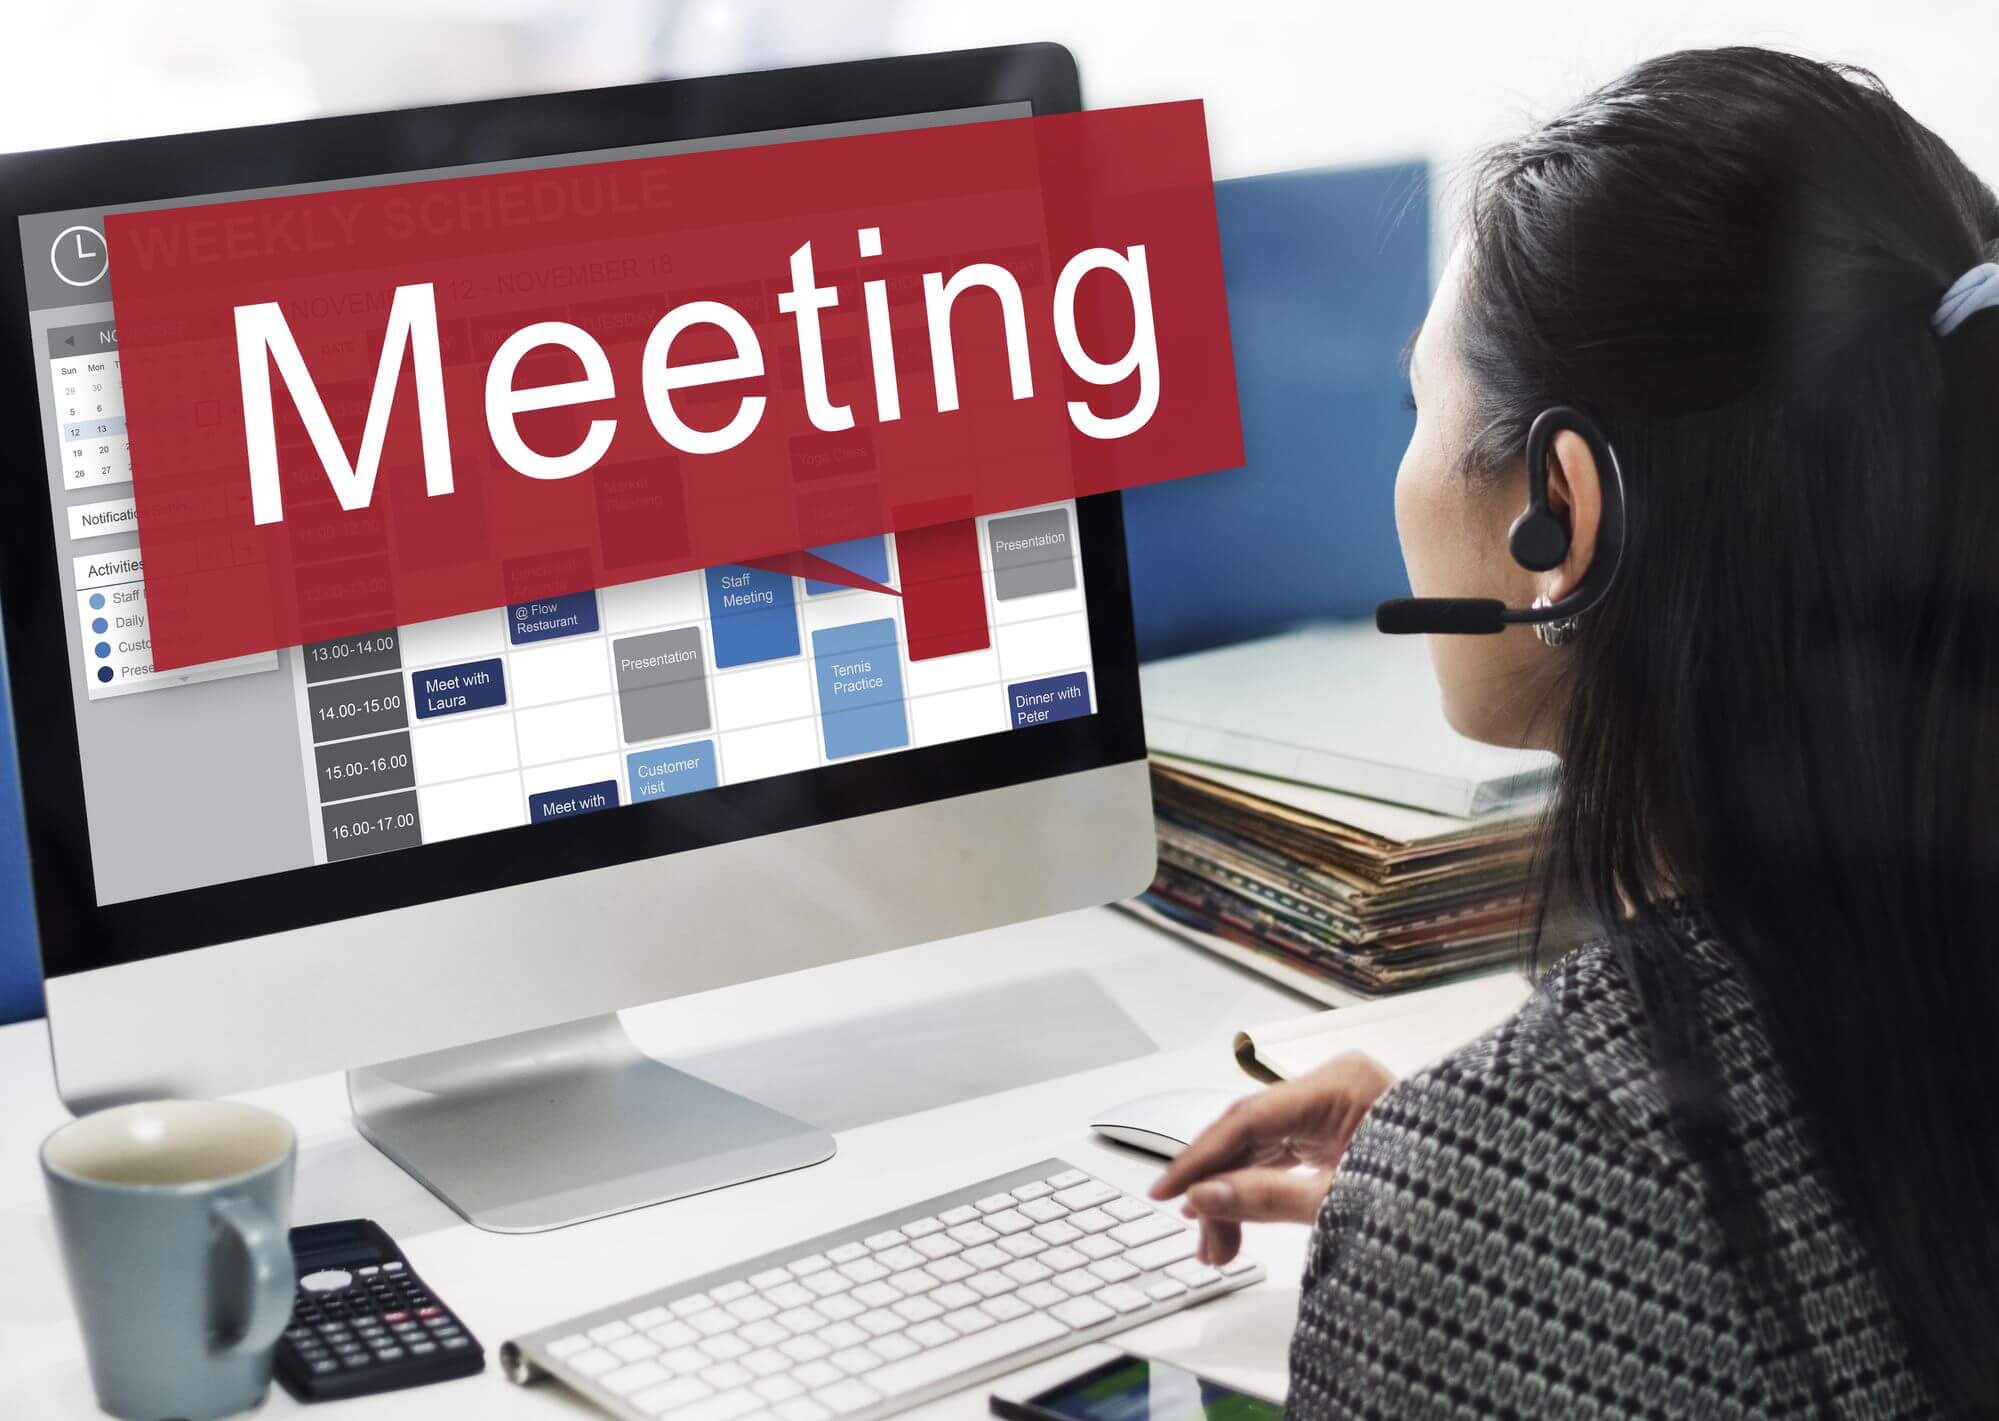 What Do You Need to Start an Online Meeting?